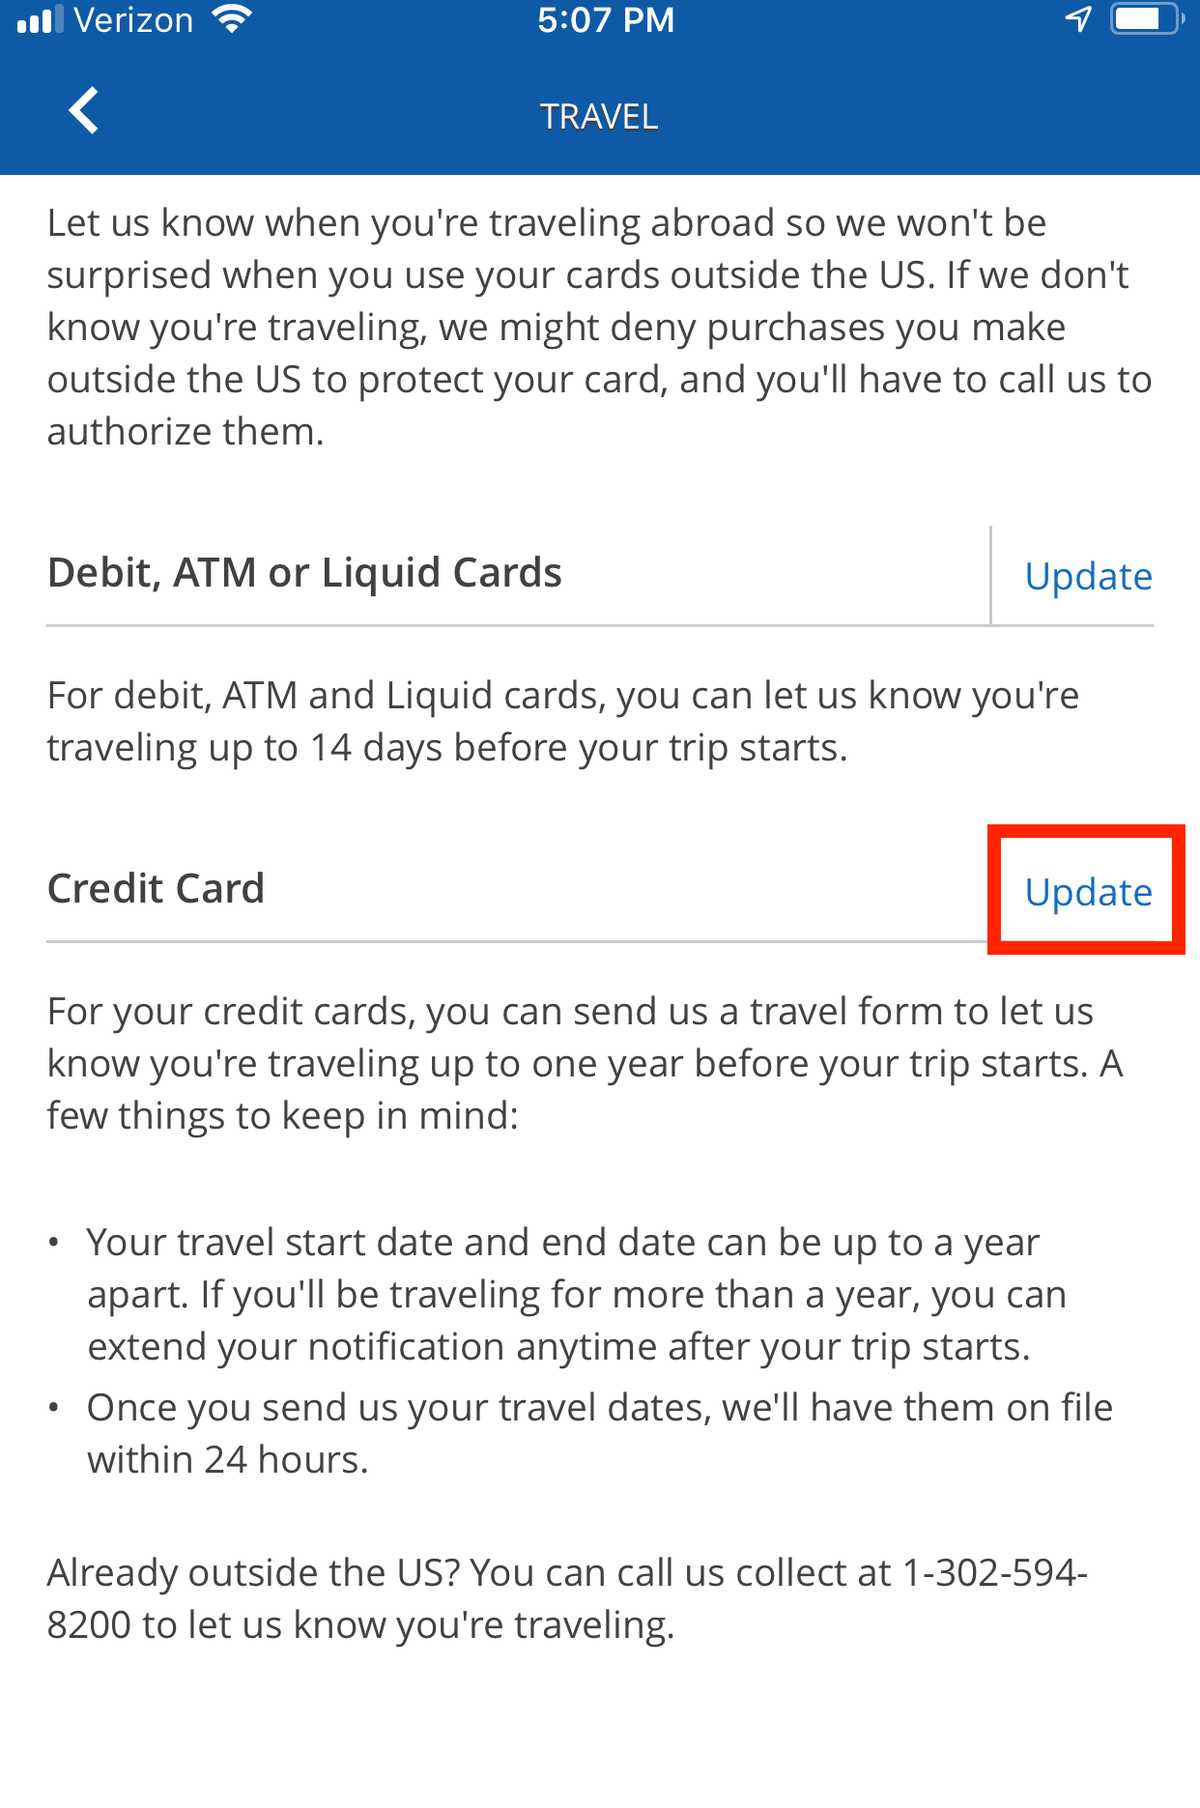 chase mobile app travel notice